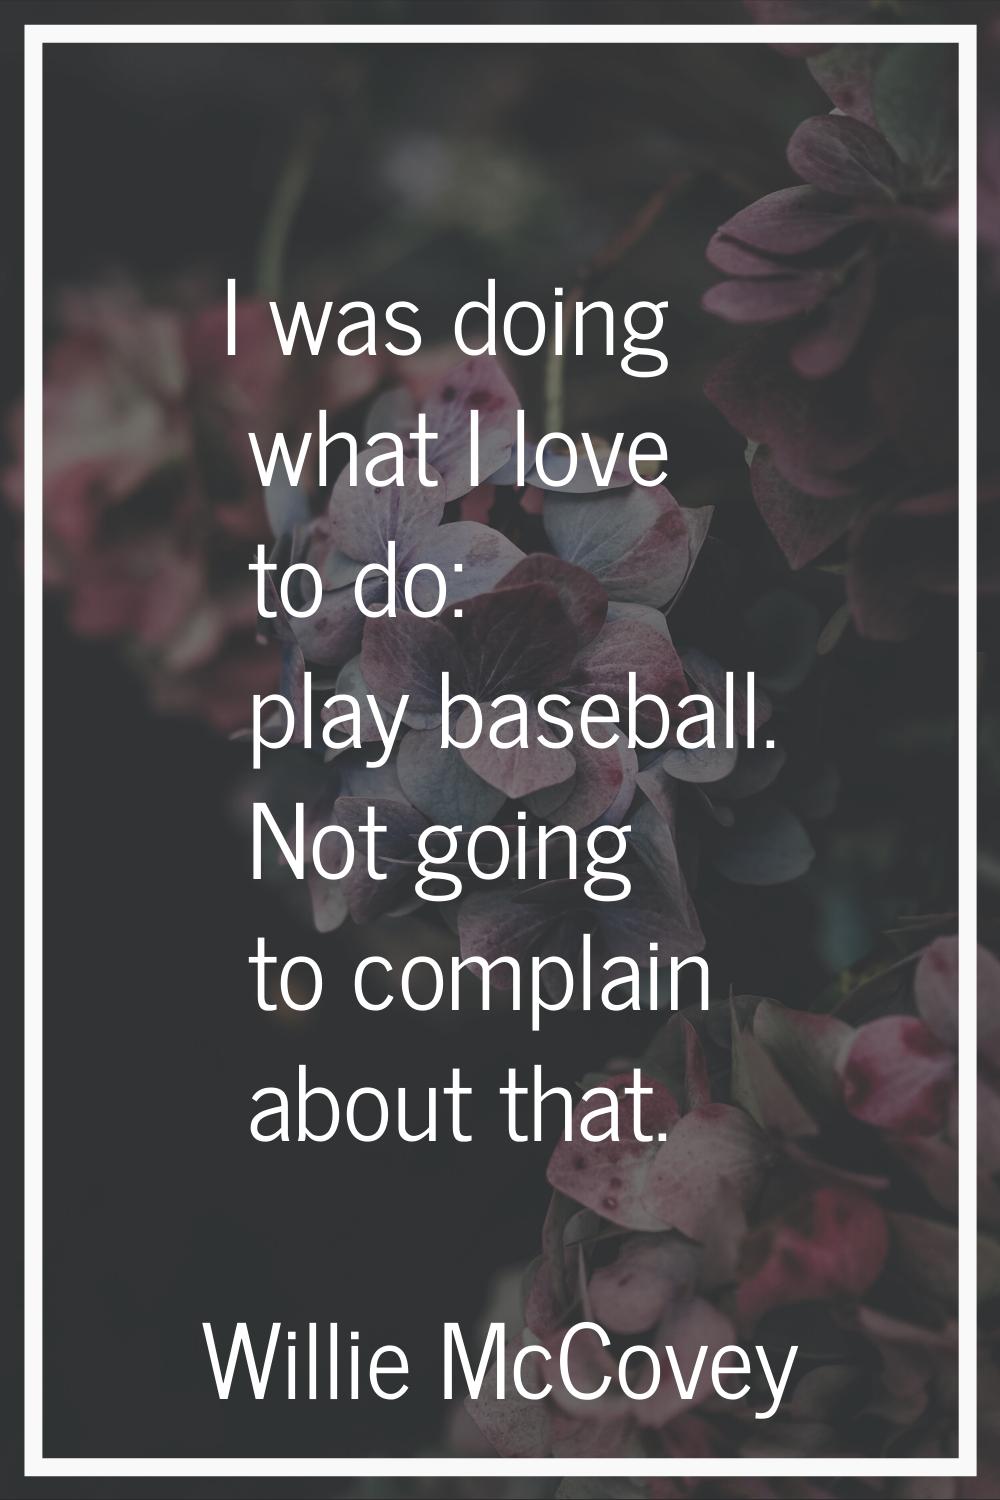 I was doing what I love to do: play baseball. Not going to complain about that.